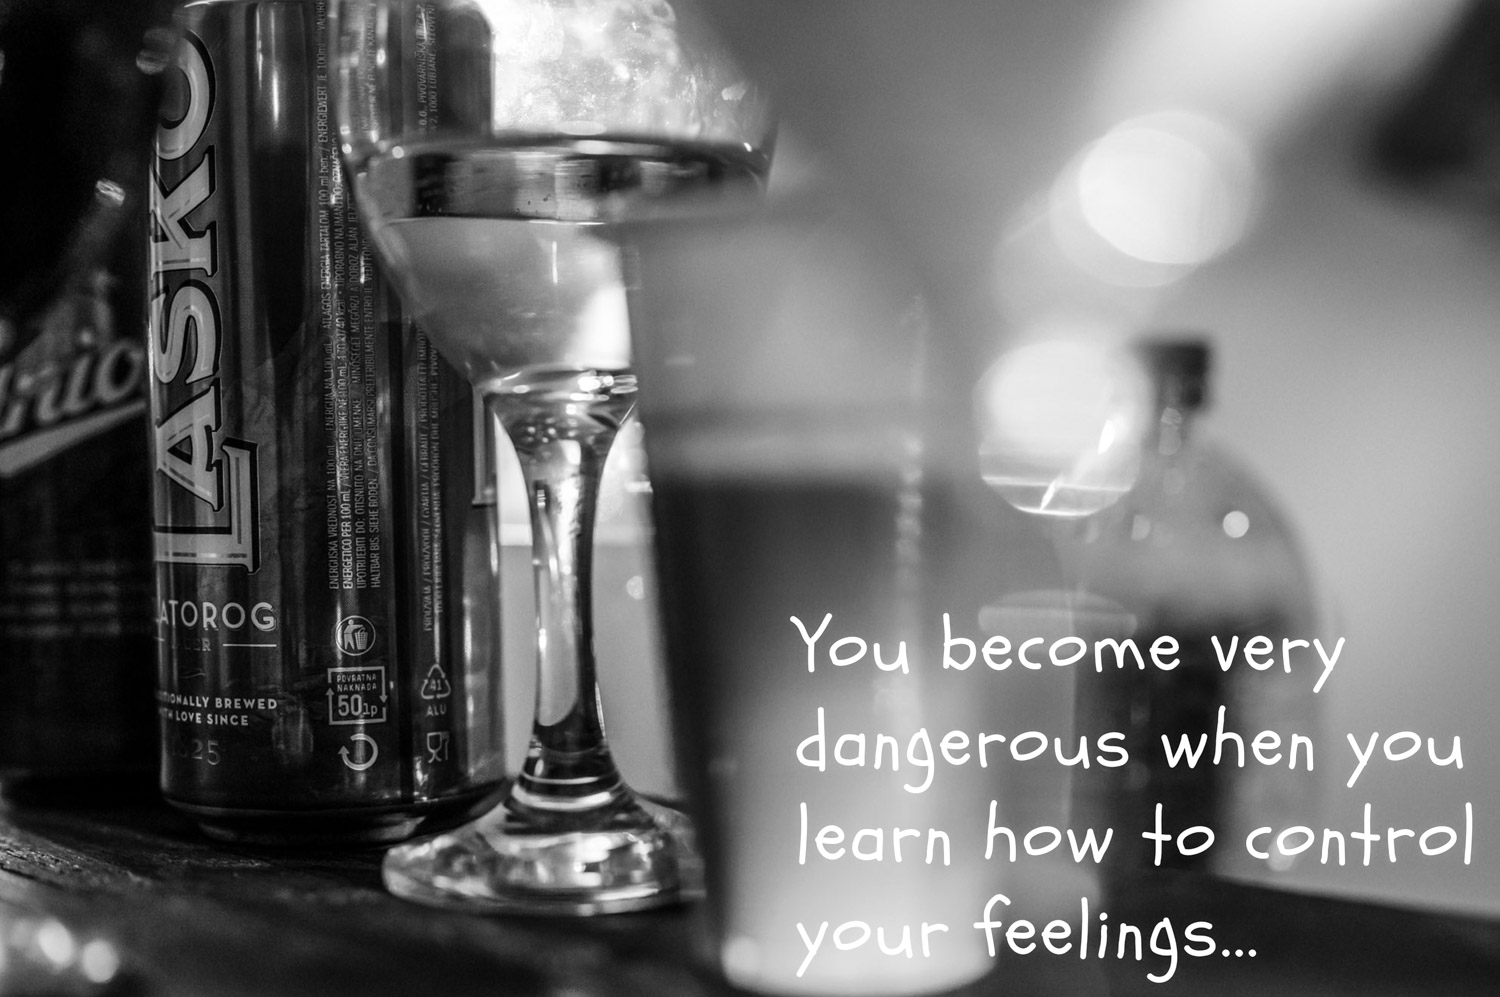 Control your feelings quote